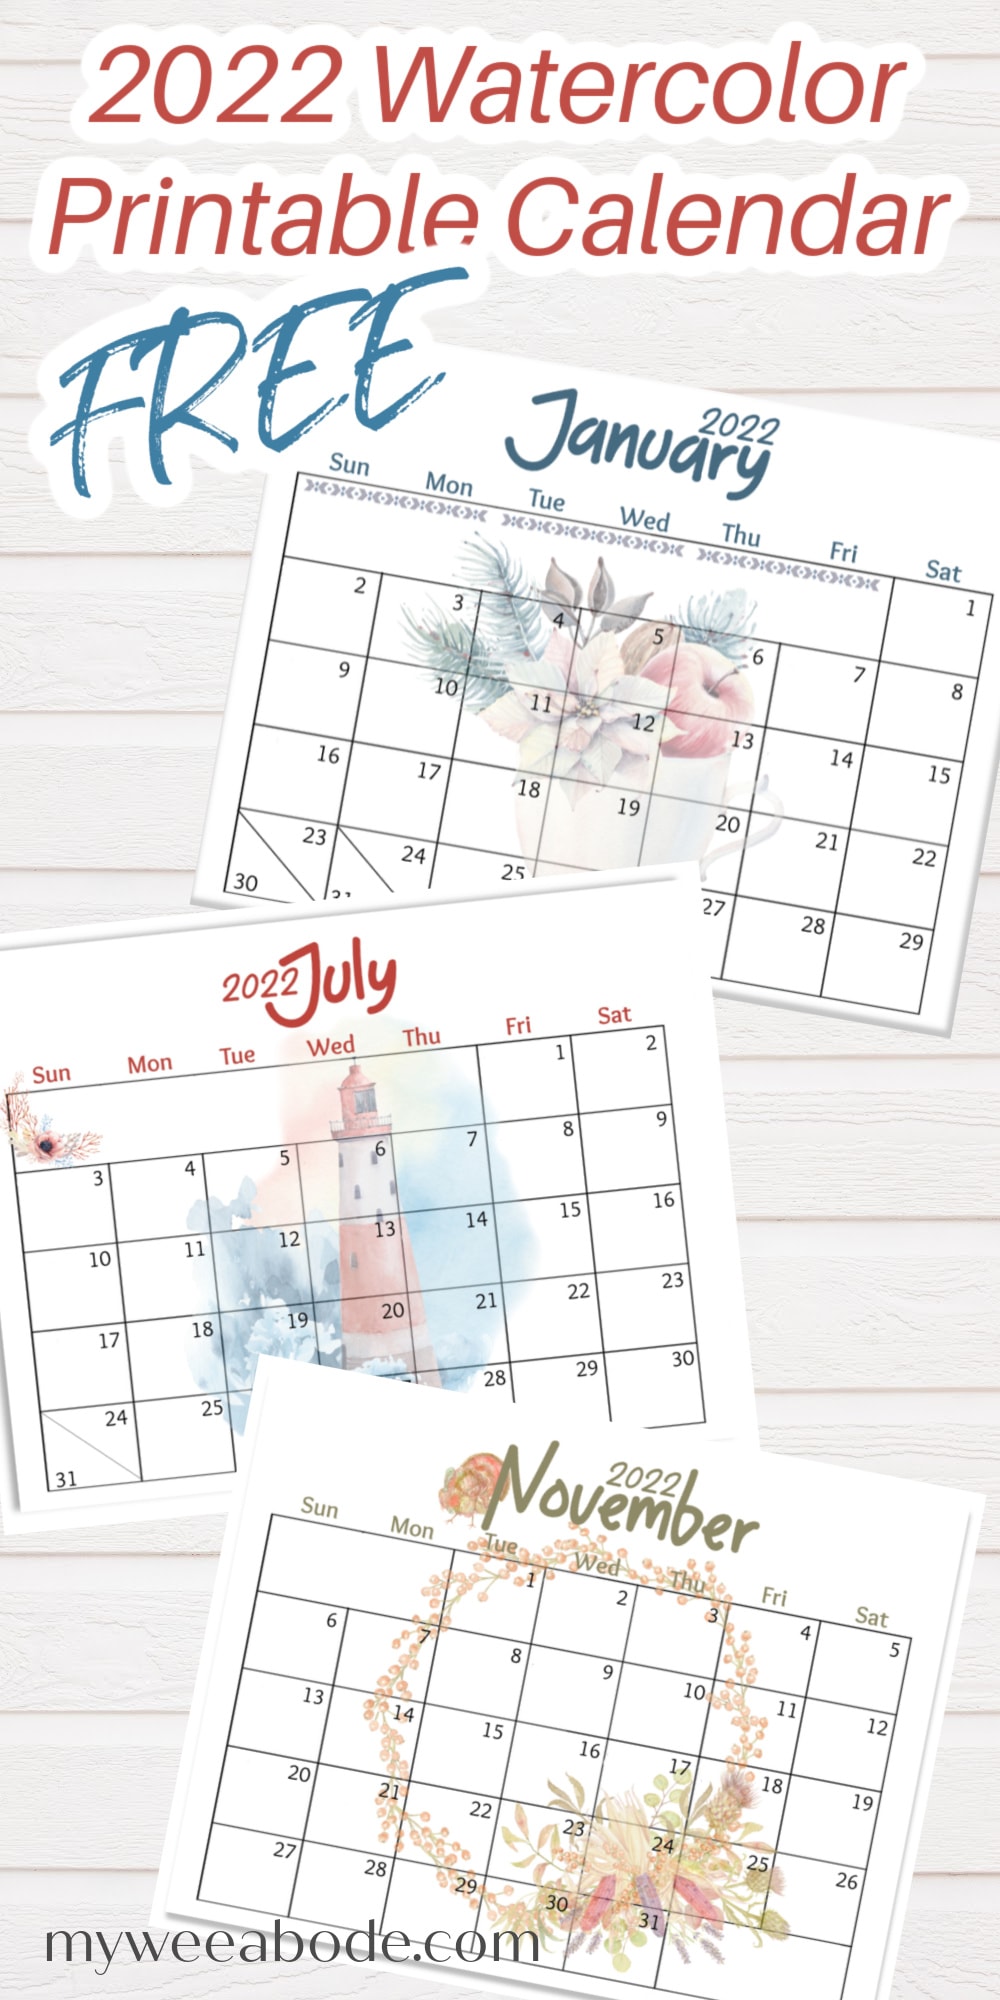 FREE 2022 Printable Calendar in Watercolor collage of calendar months